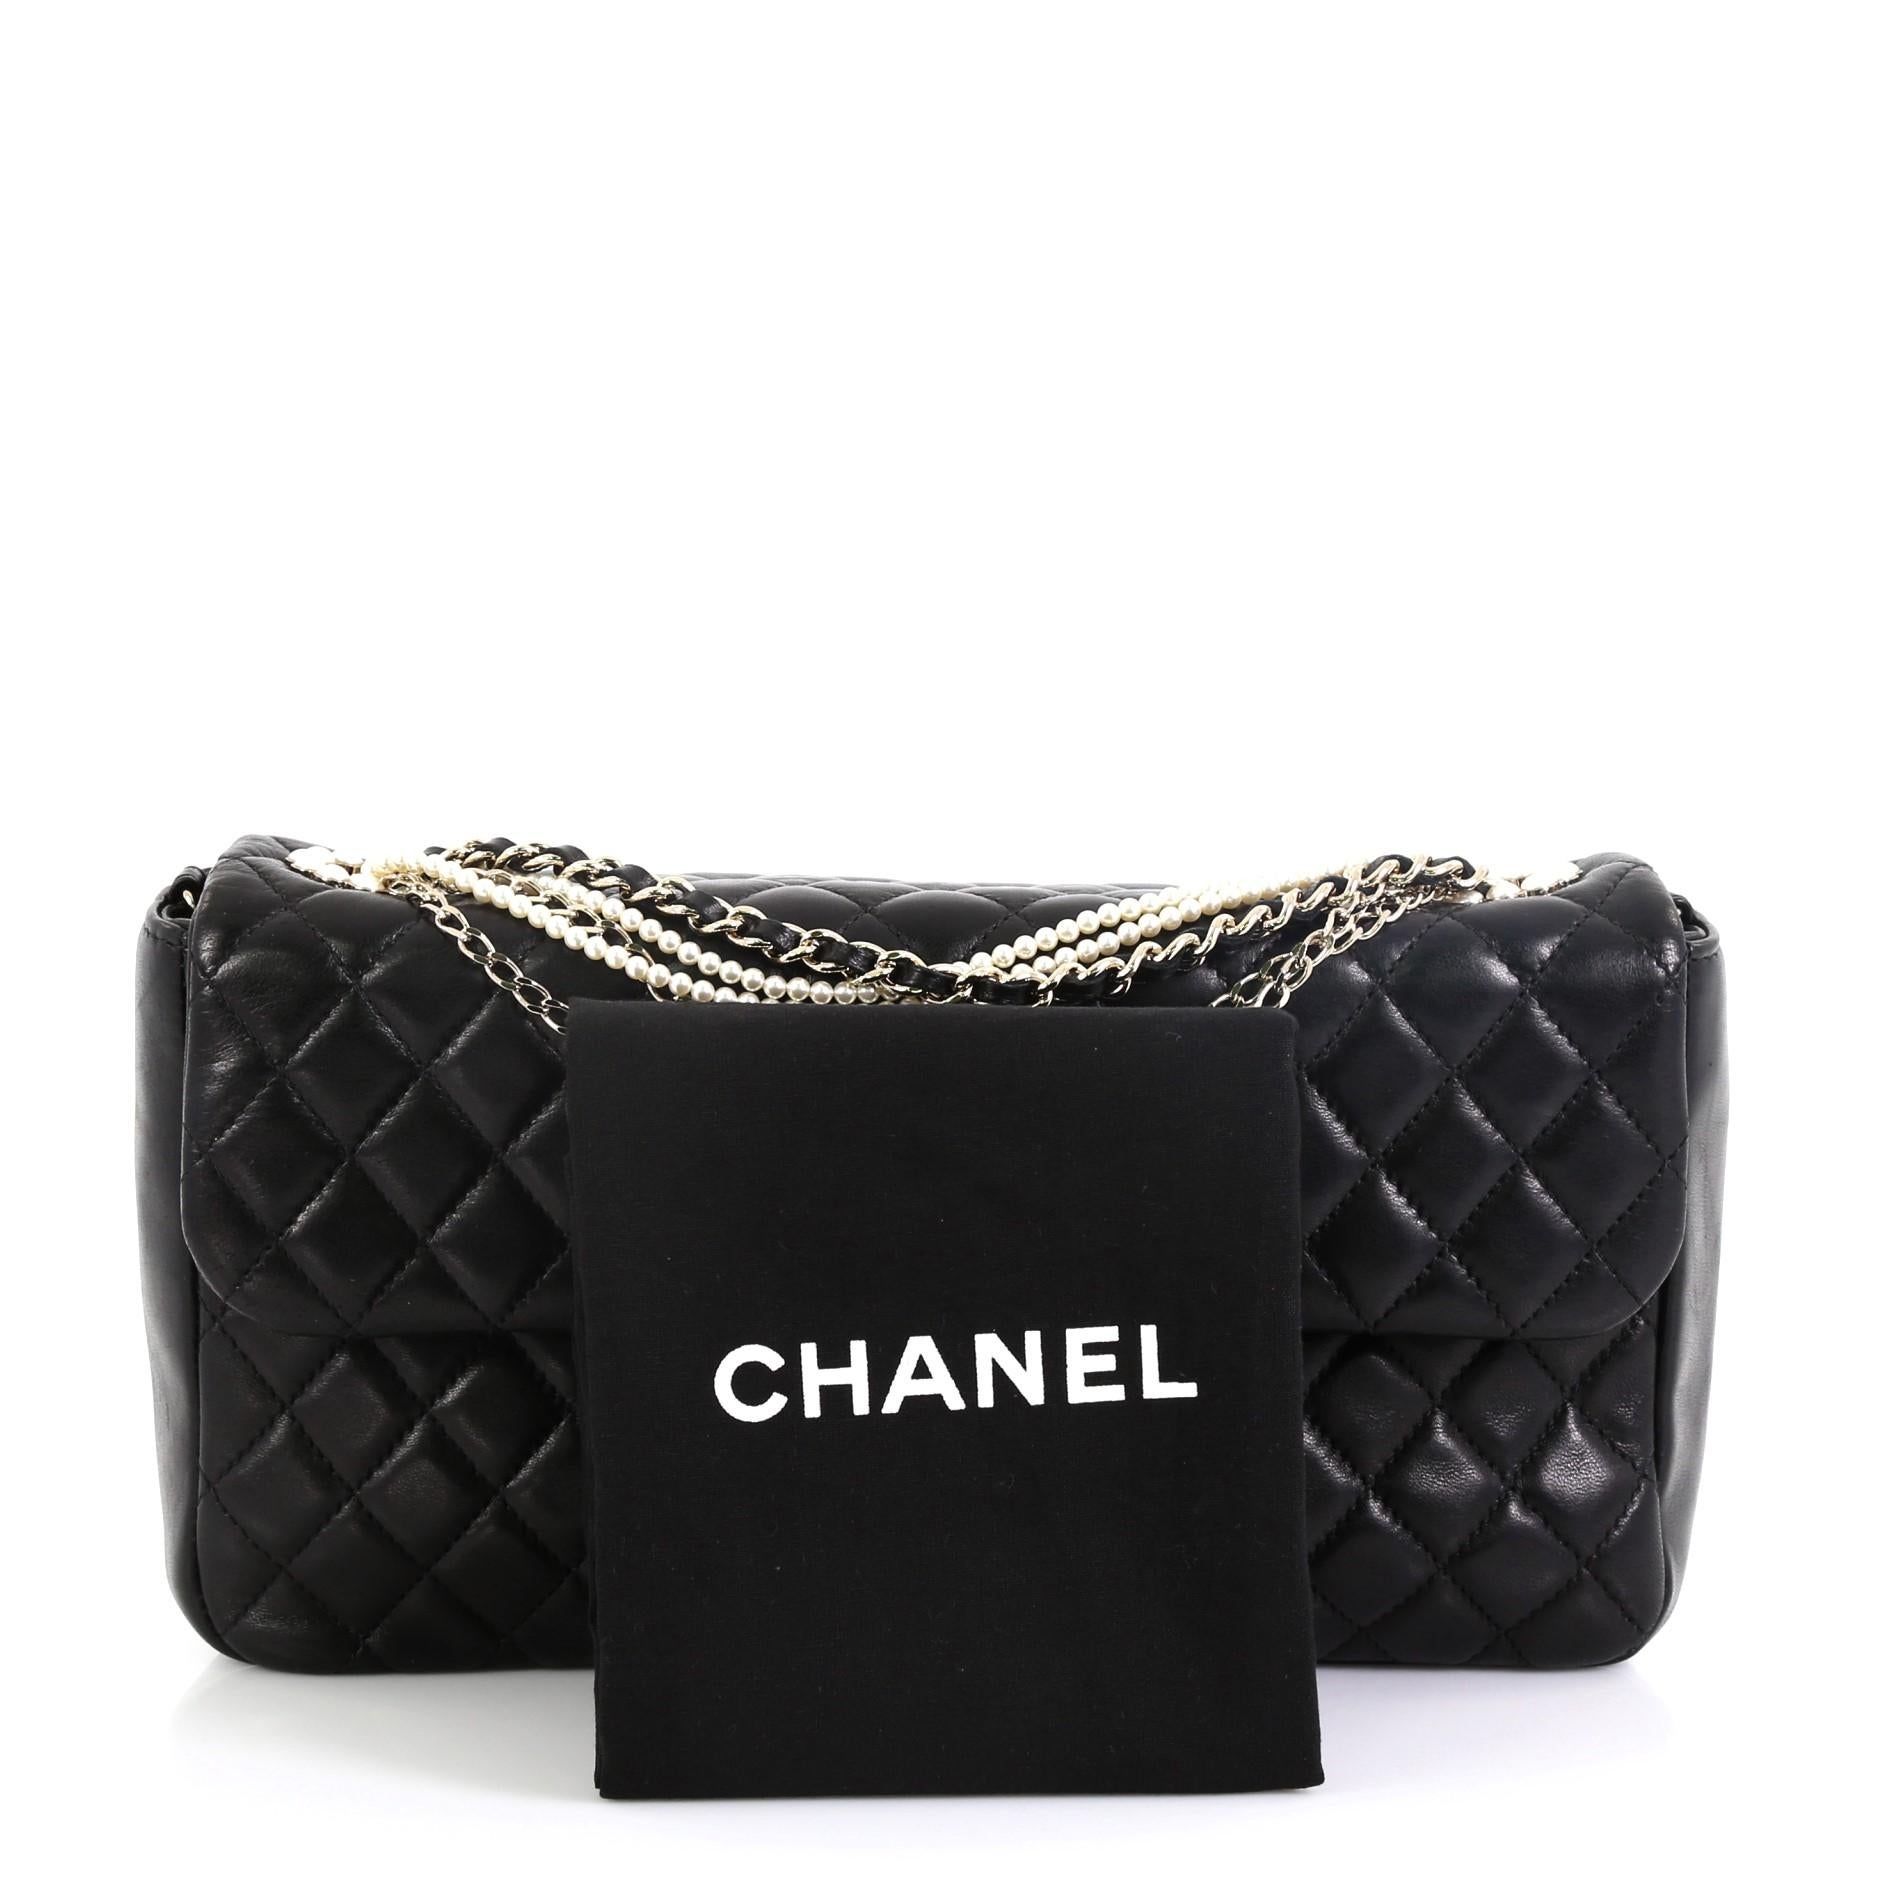 This Chanel Westminster Pearl Chain Flap Bag Quilted Lambskin Medium, crafted from black quilted lambskin leather, features chain and pearl strap, pearl-studded CC logo, and gold-tone hardware. Its magnetic snap button closure opens to a gray fabric